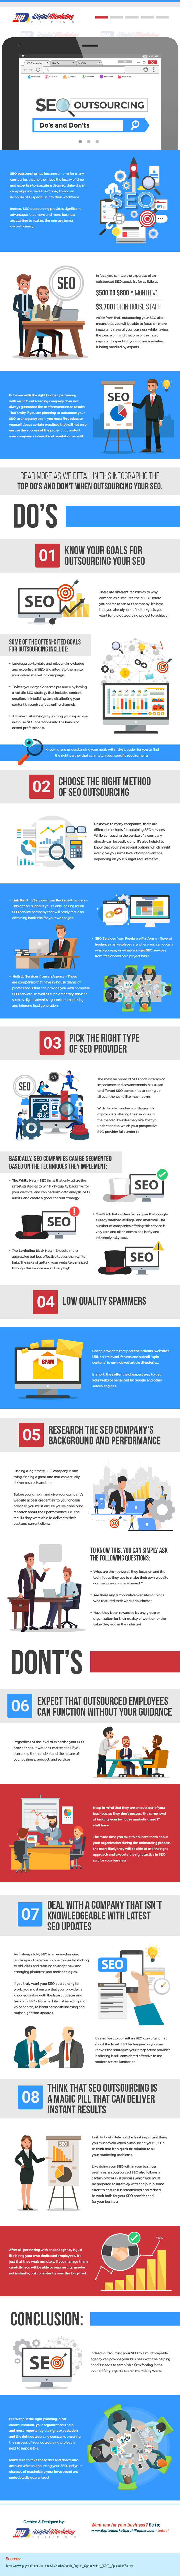 SEO Outsourcing – Dos and Don’ts [Infographic]